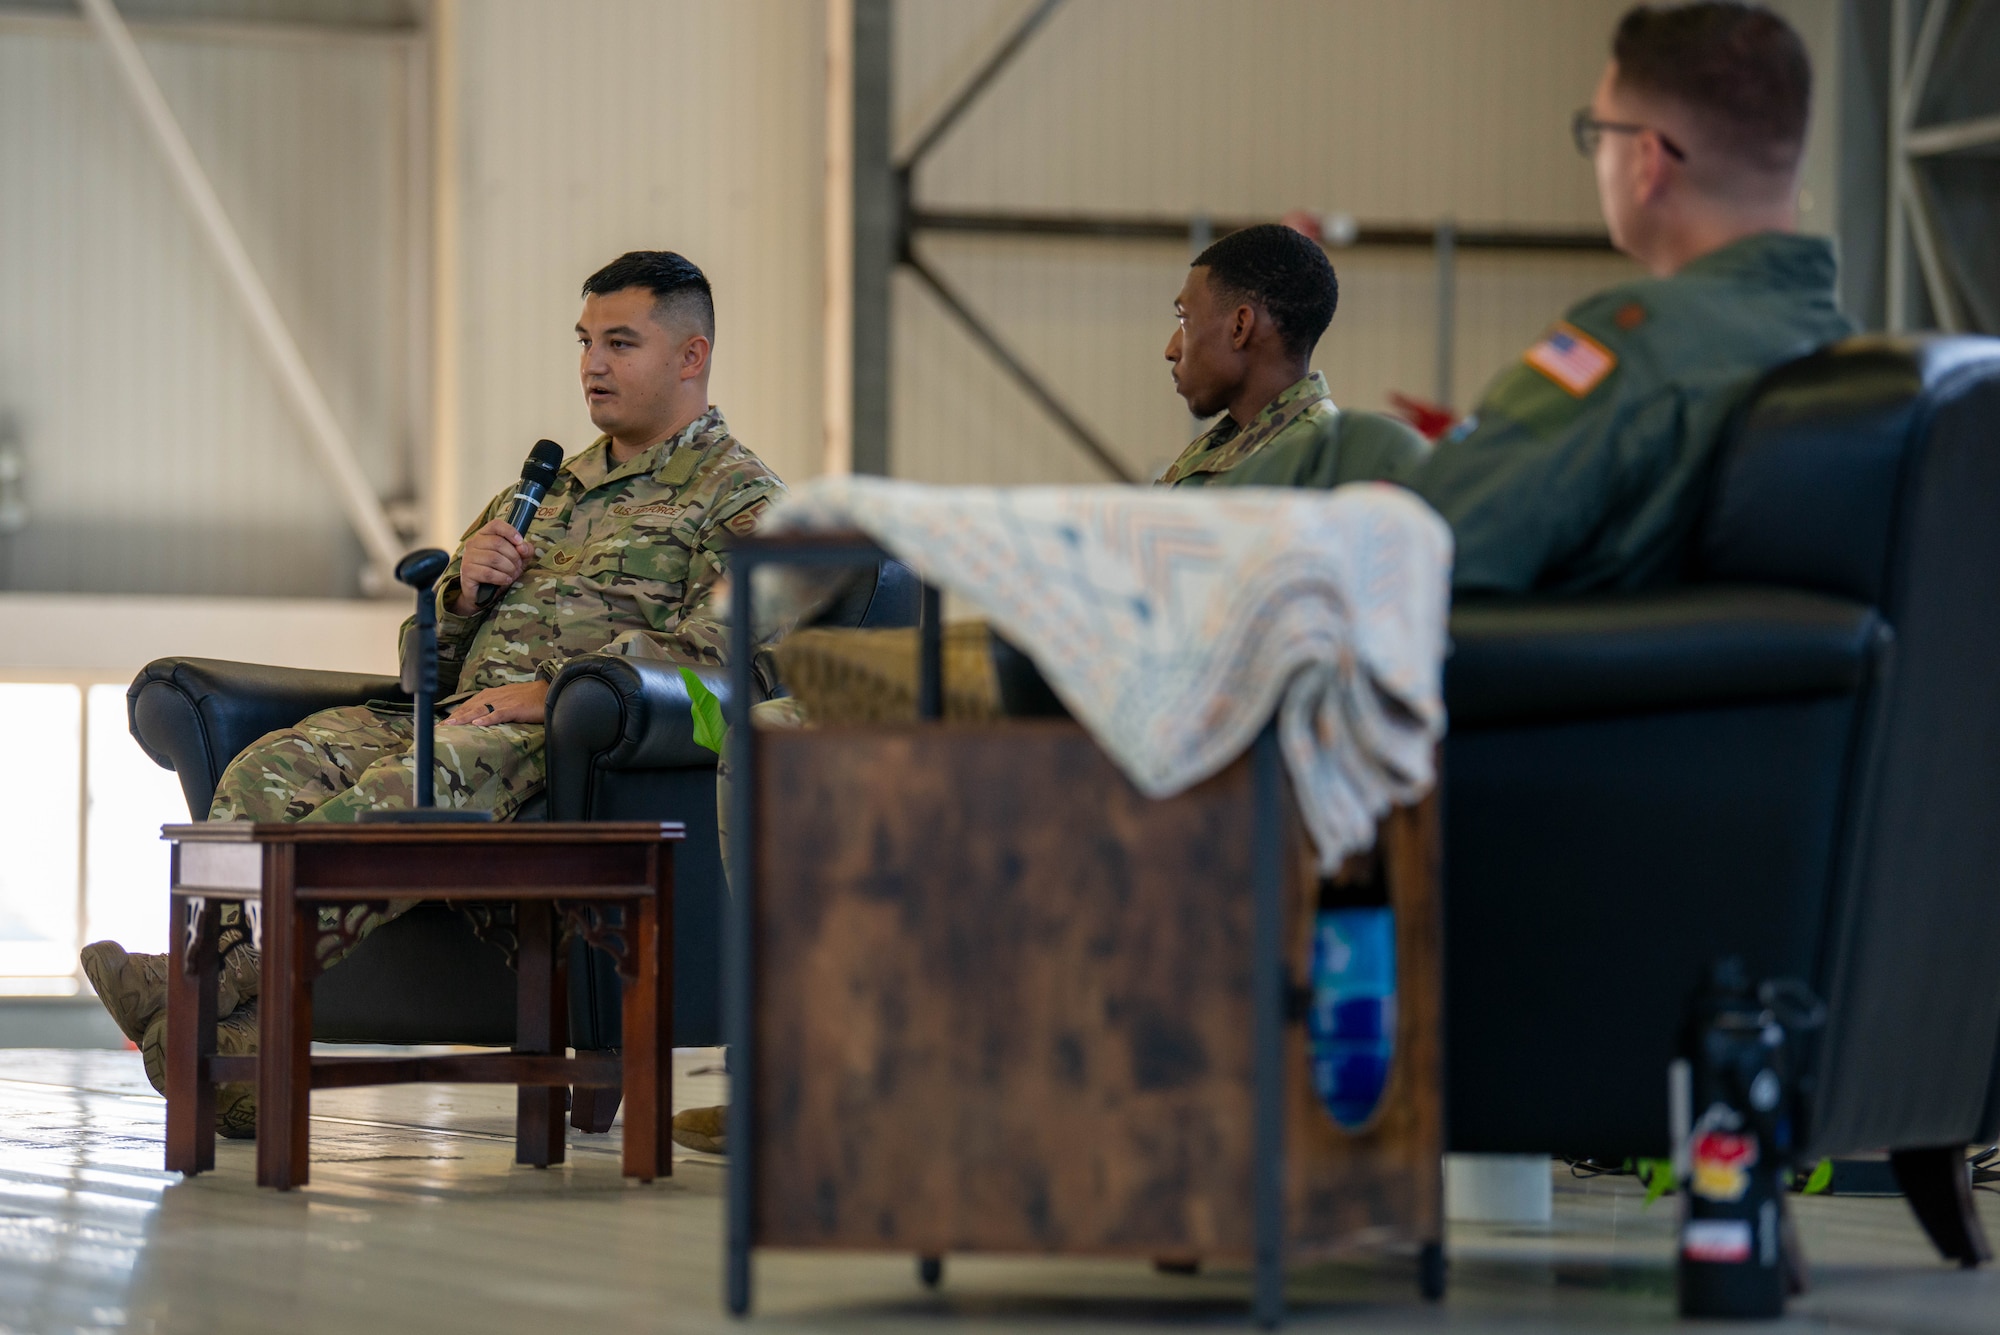 An Airman shares his story during a storytellers event